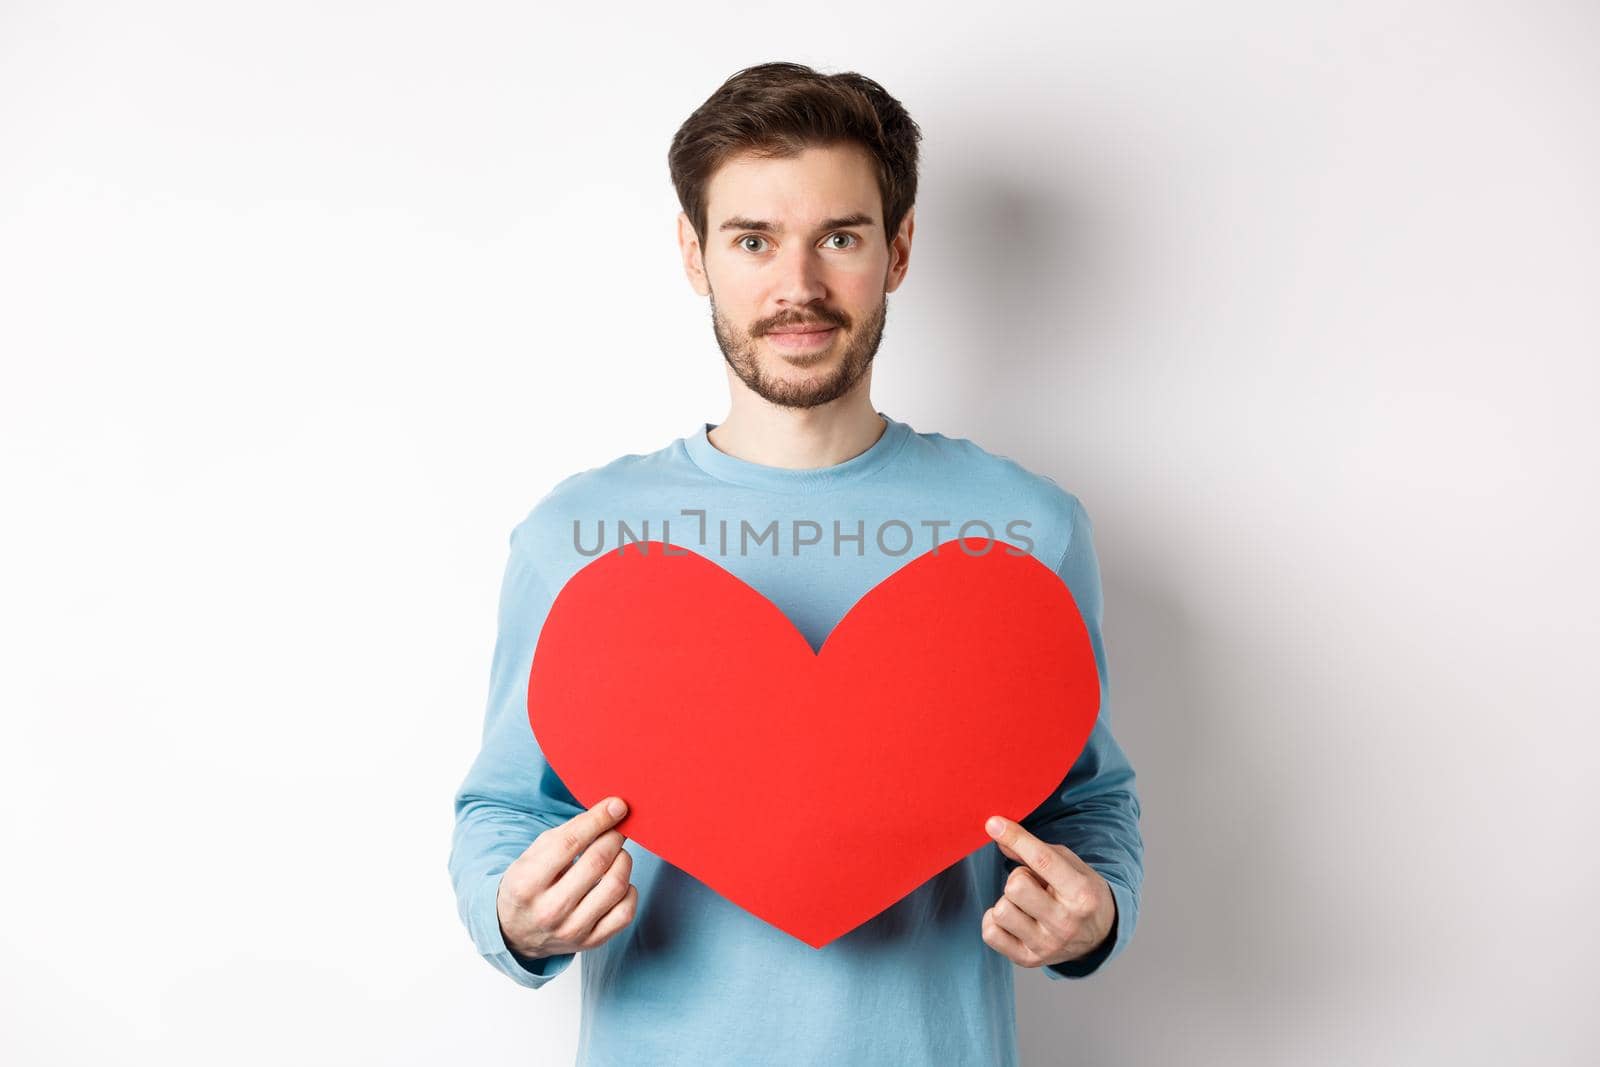 Smiling young man holding valentines heart cutout and looking at camera, waiting for true love girlfriend, standing over white background.